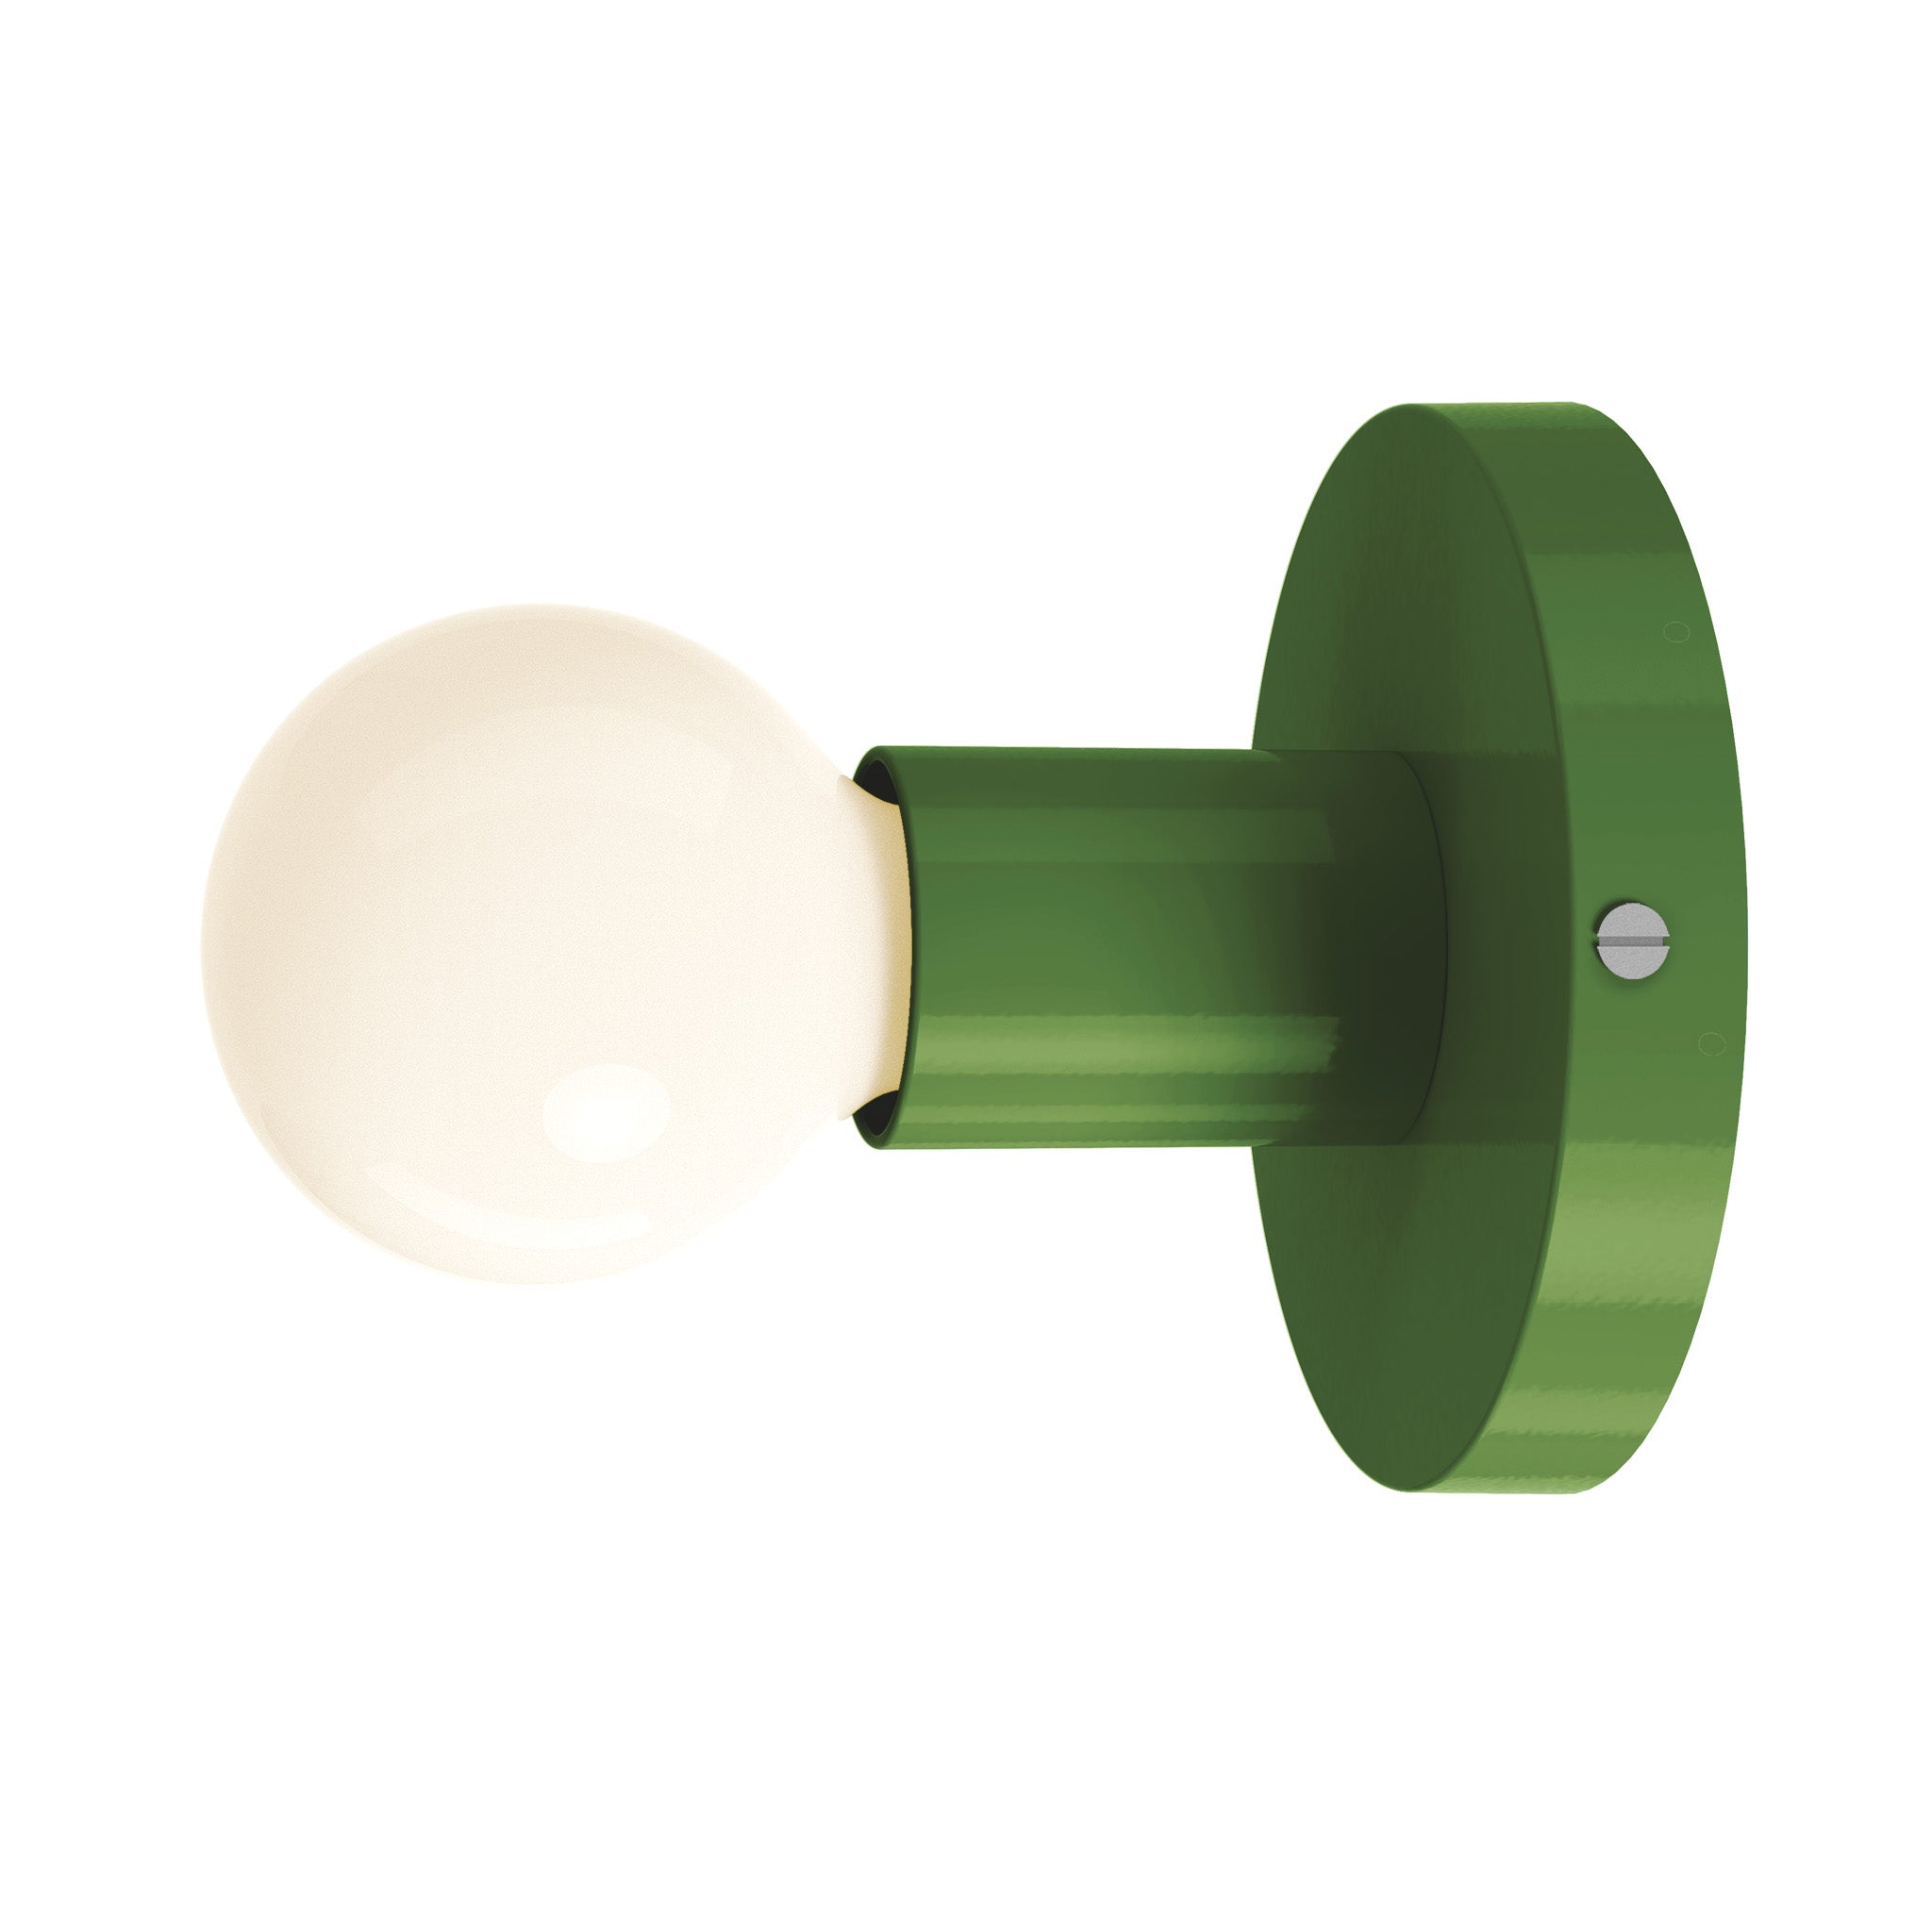 nickel python green color twink sconce dutton brown lighting